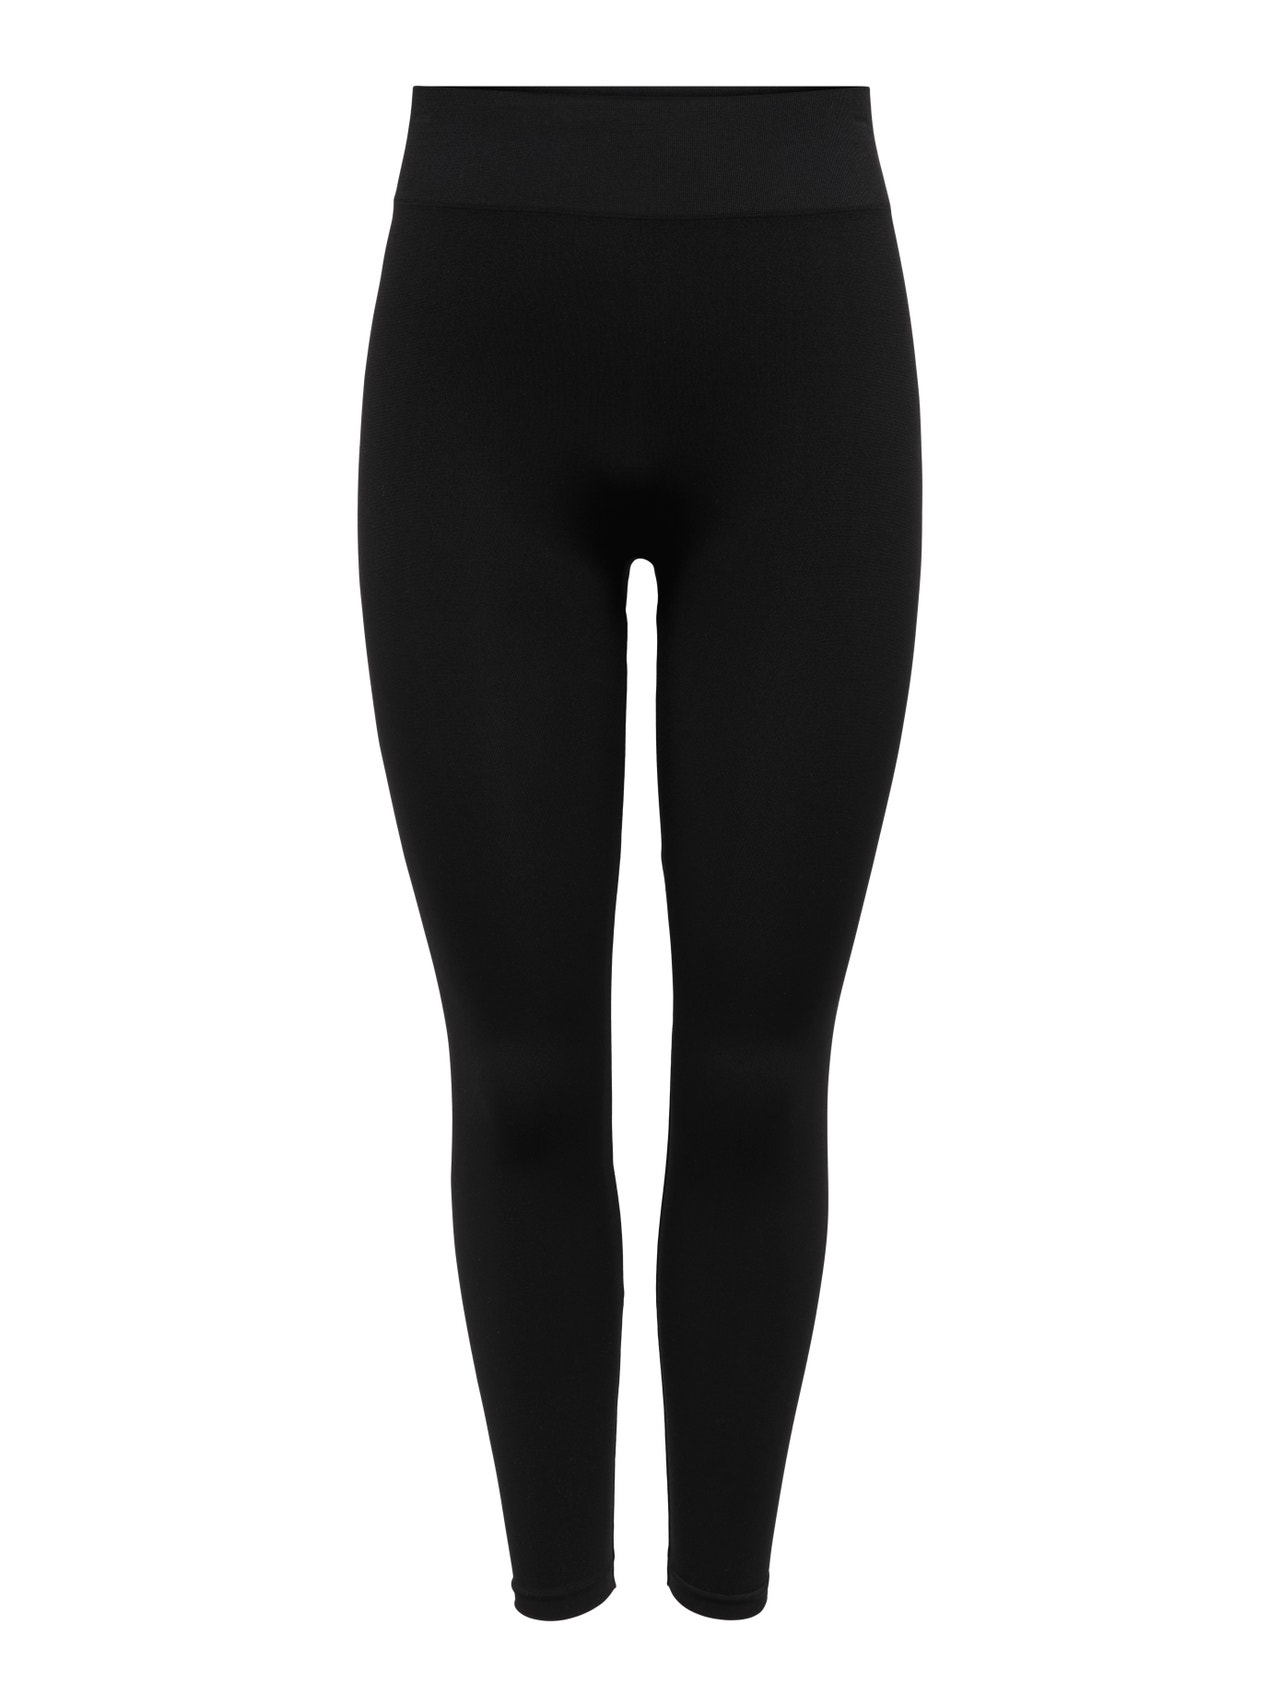 ONLY Tight fit High waist Legging -Black - 15296630